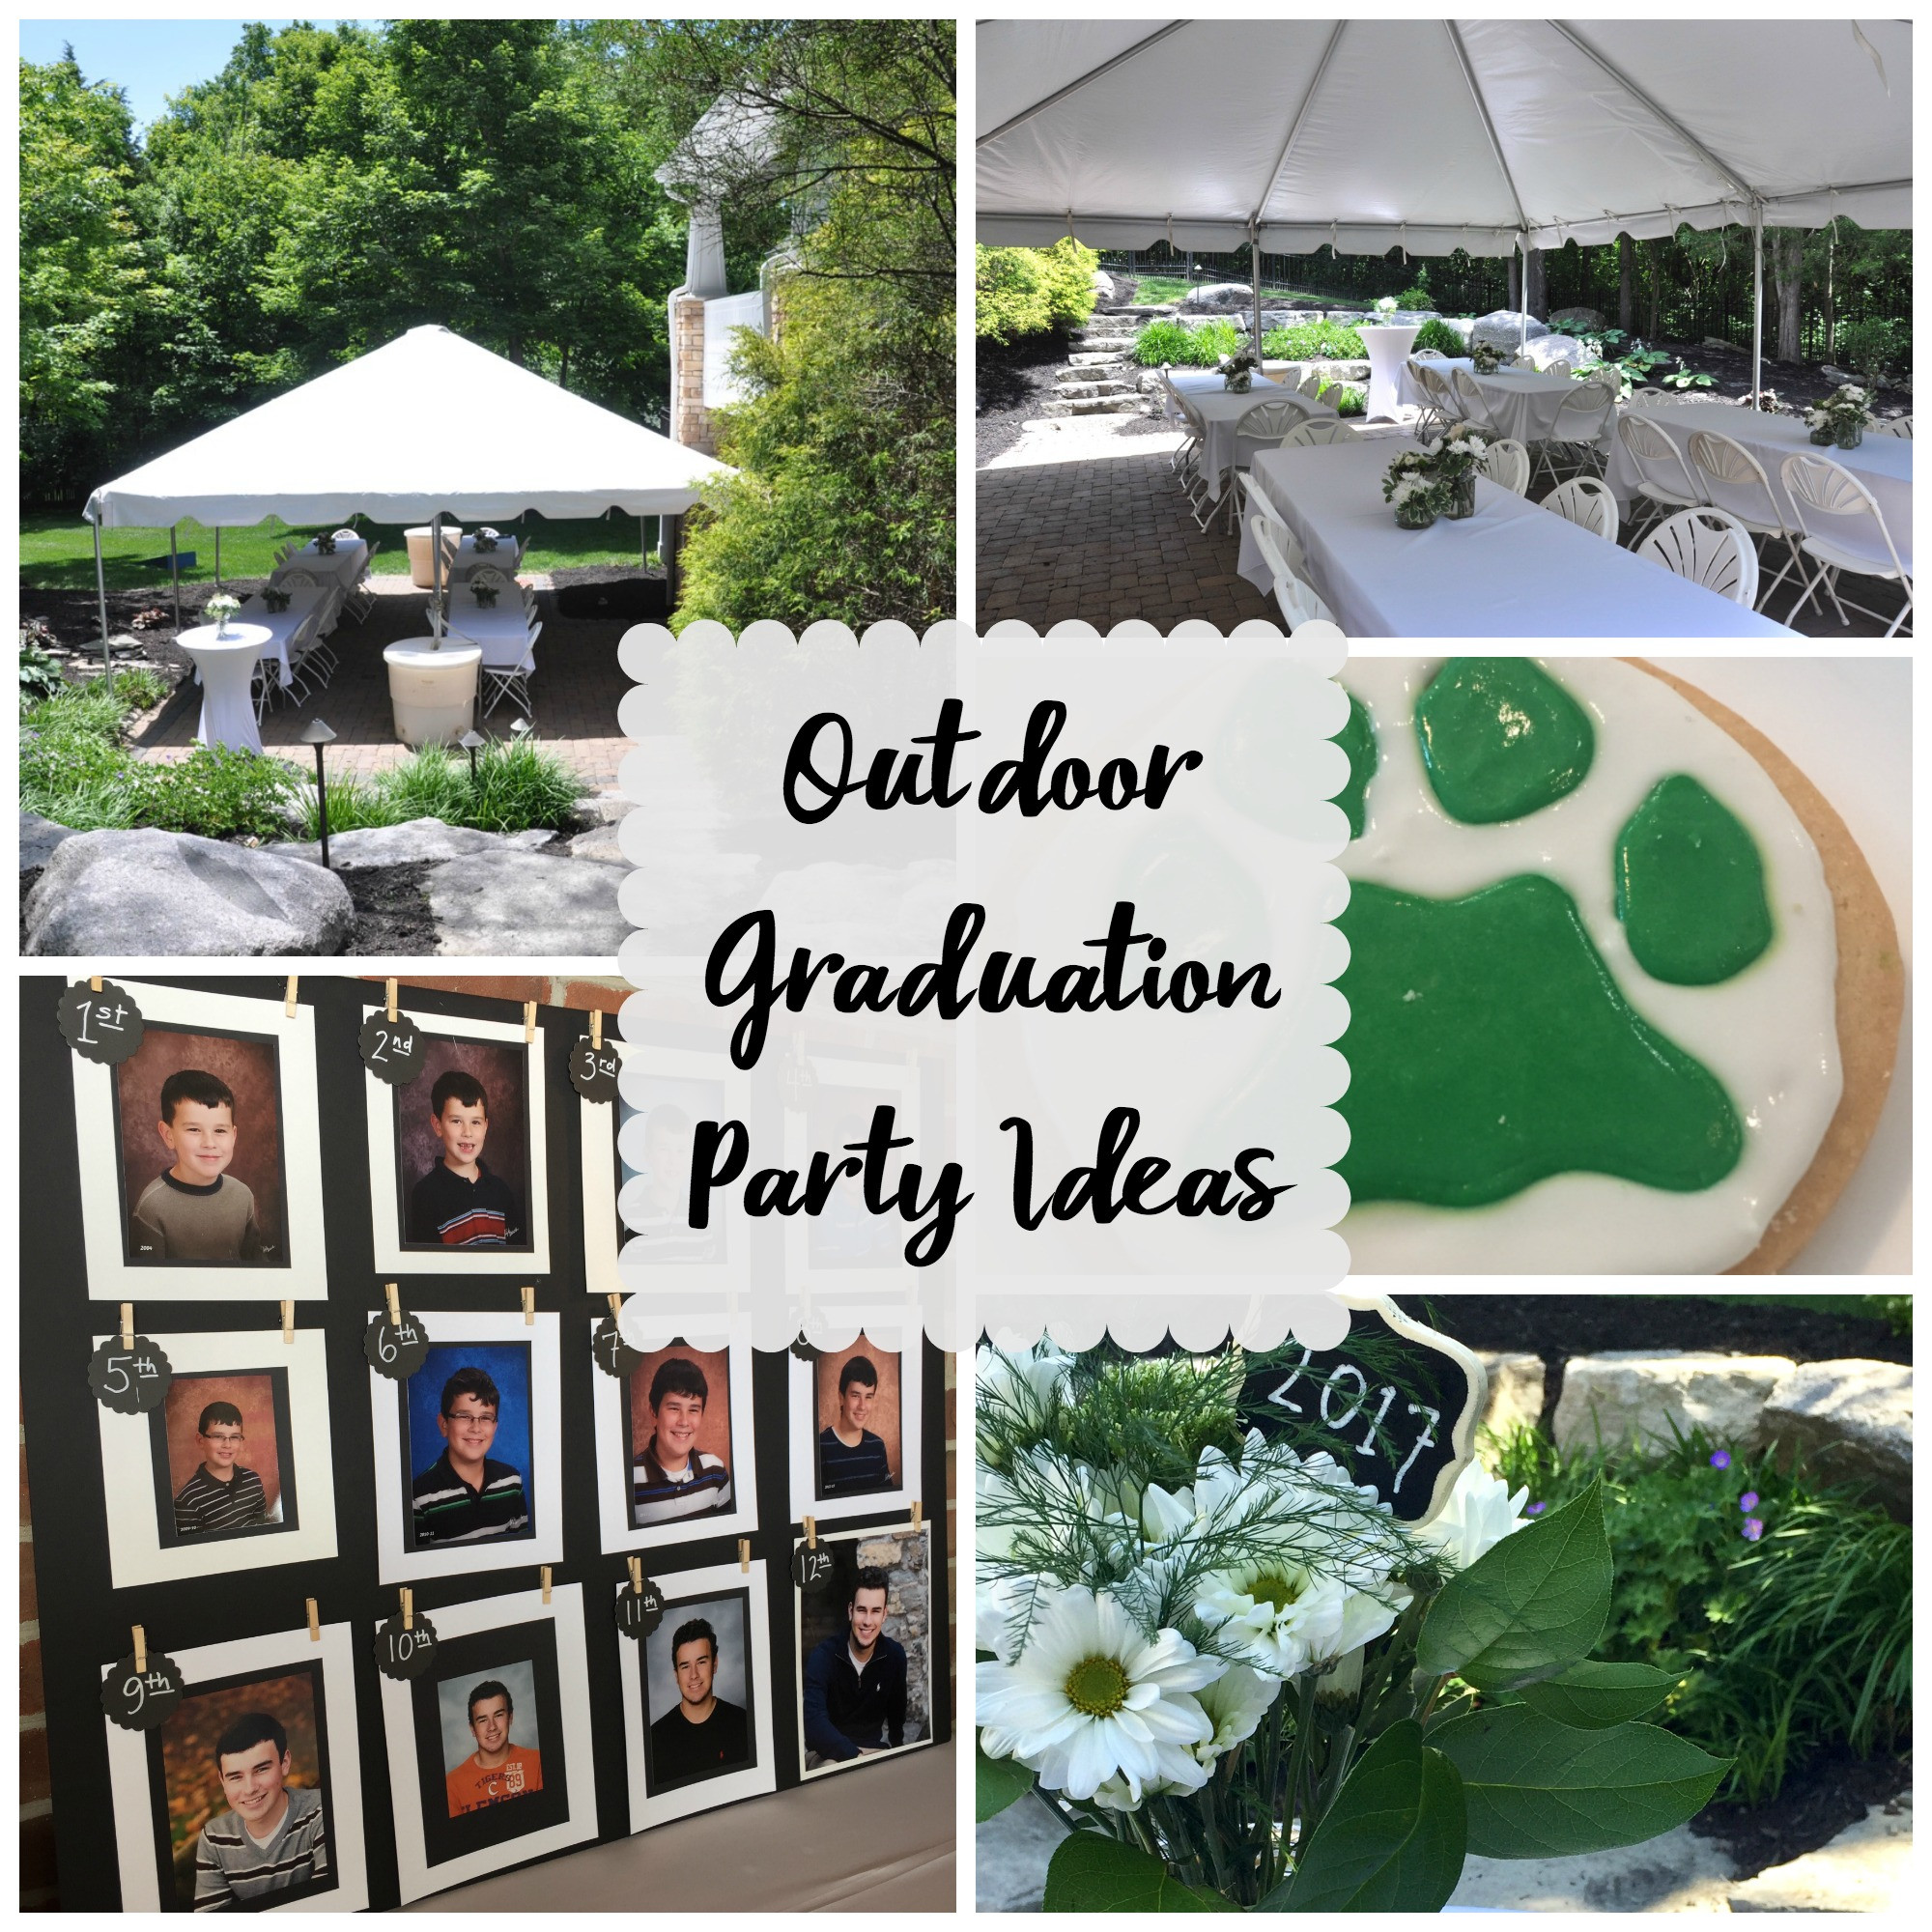 Outdoor Graduation Party Ideas
 Outdoor Graduation Party Evolution of Style